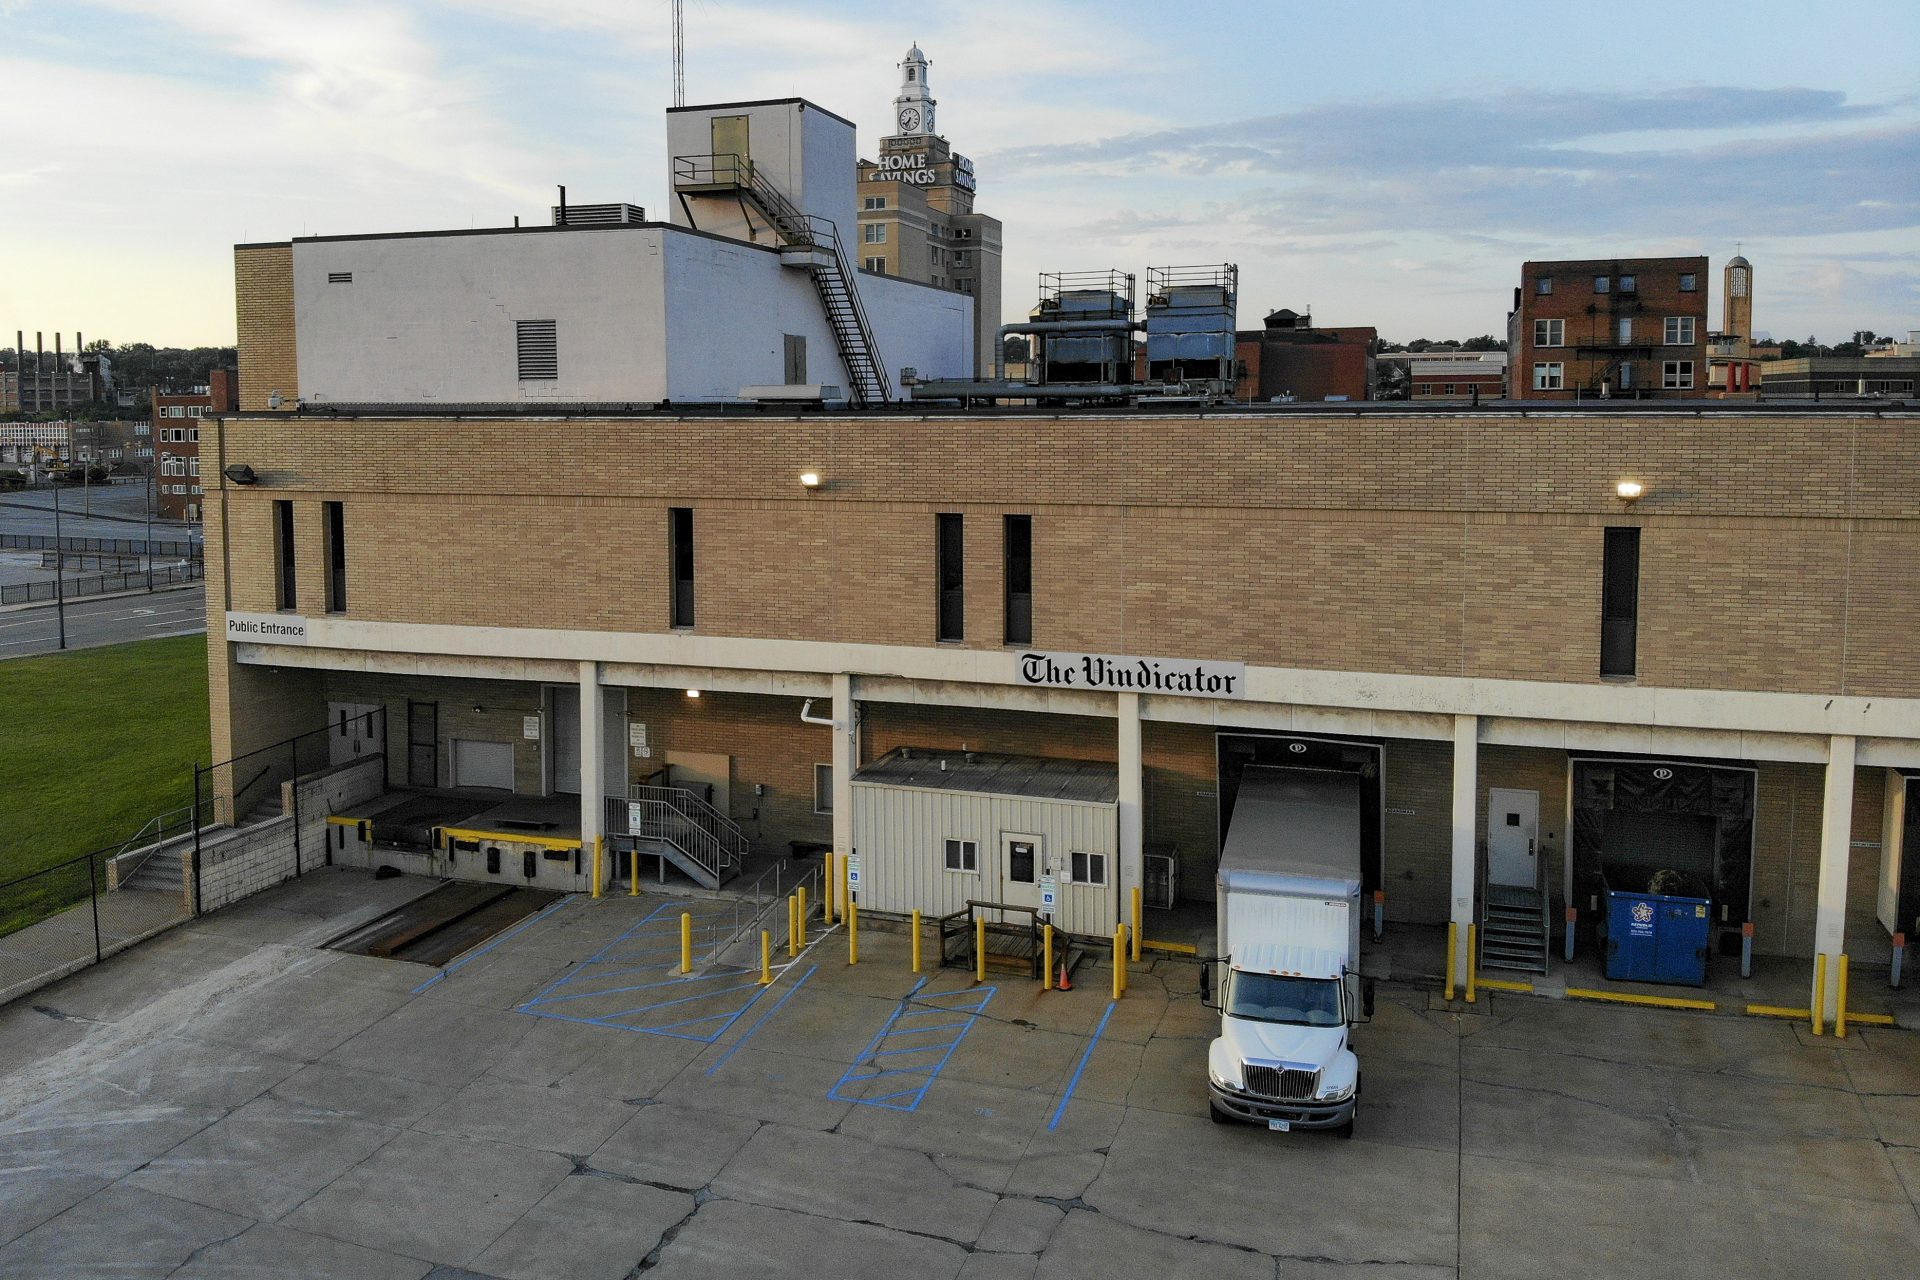 In this Wednesday, Aug. 14, 2019, photo, a truck is parked at the loading docks of the Vindicator printing depot in Youngstown, Ohio. The Youngstown paper announced in June it would cease publication Saturday, Aug. 31, because of financial struggles, but the paper will be printed by the Tribune Chronicle, which has bought The Vindicator name, subscriber list and website from owners of the Youngstown publication.